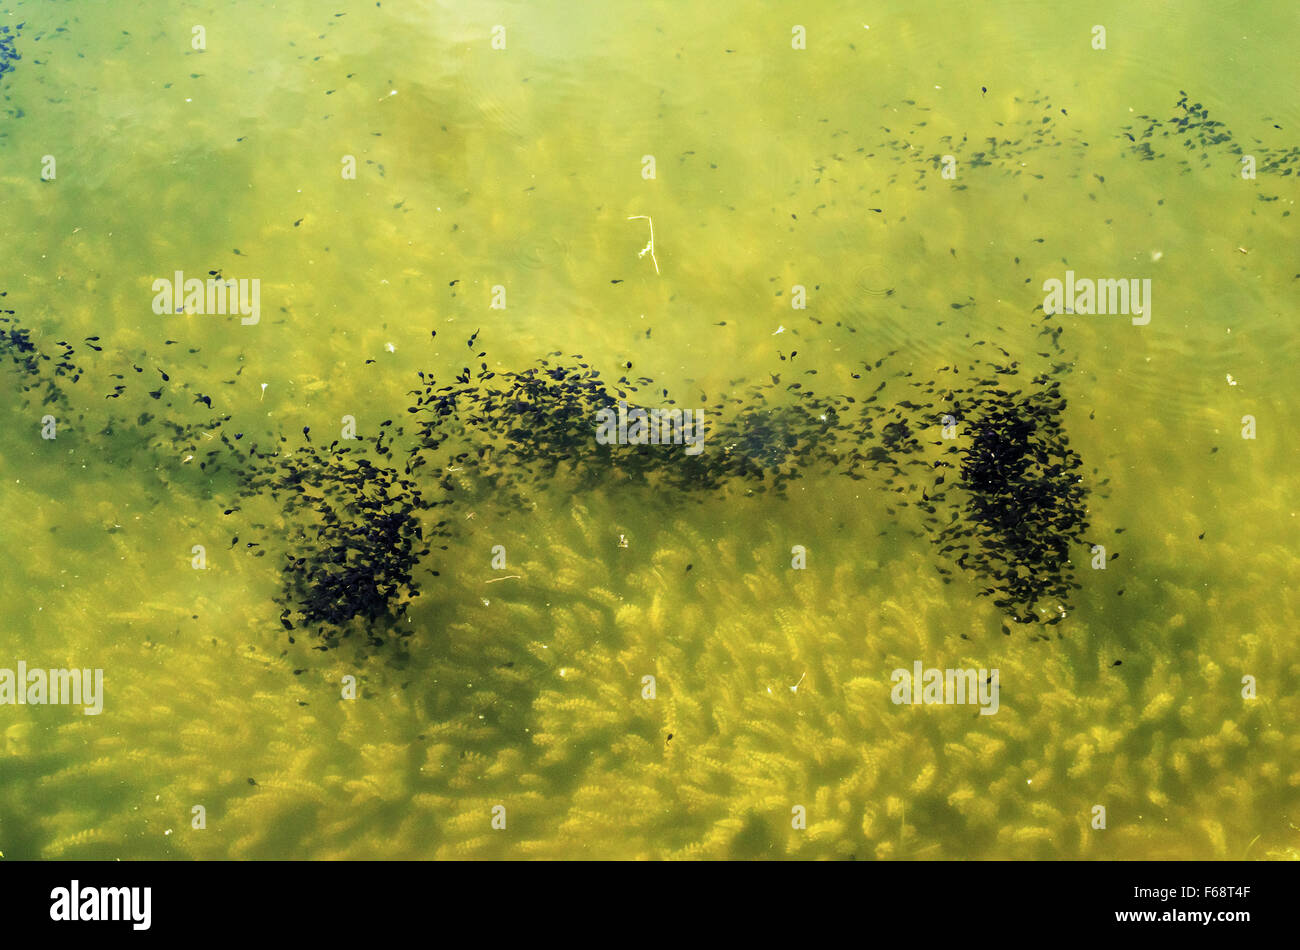 Spring.Shoal of tadpoles in a pond. Stock Photo